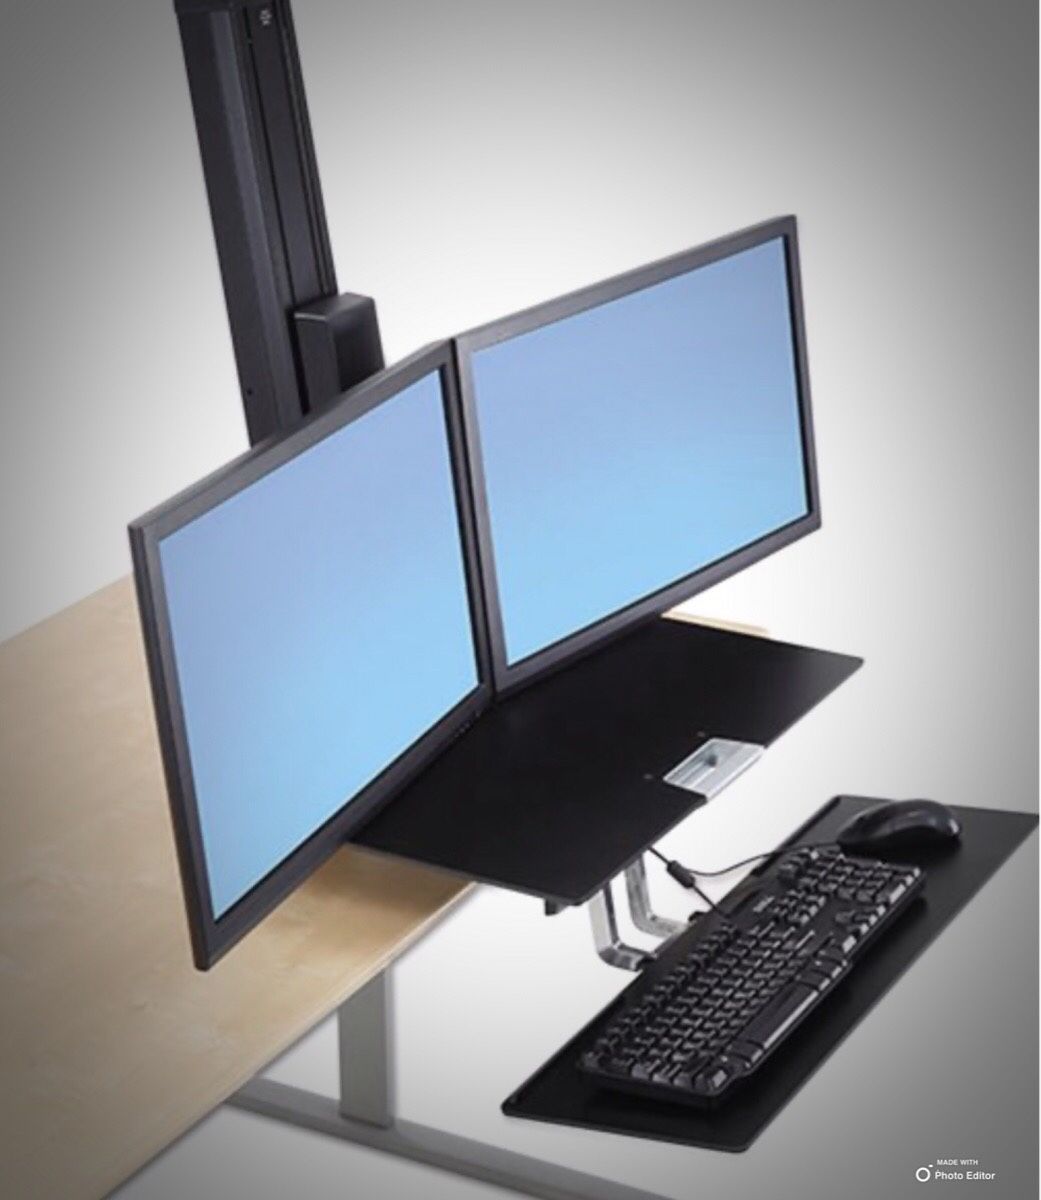 New!! Desk top workstation for dual monitor, desk mount for dual monitor, workstation, computer equipment, office furniture, workout- s for dual mo